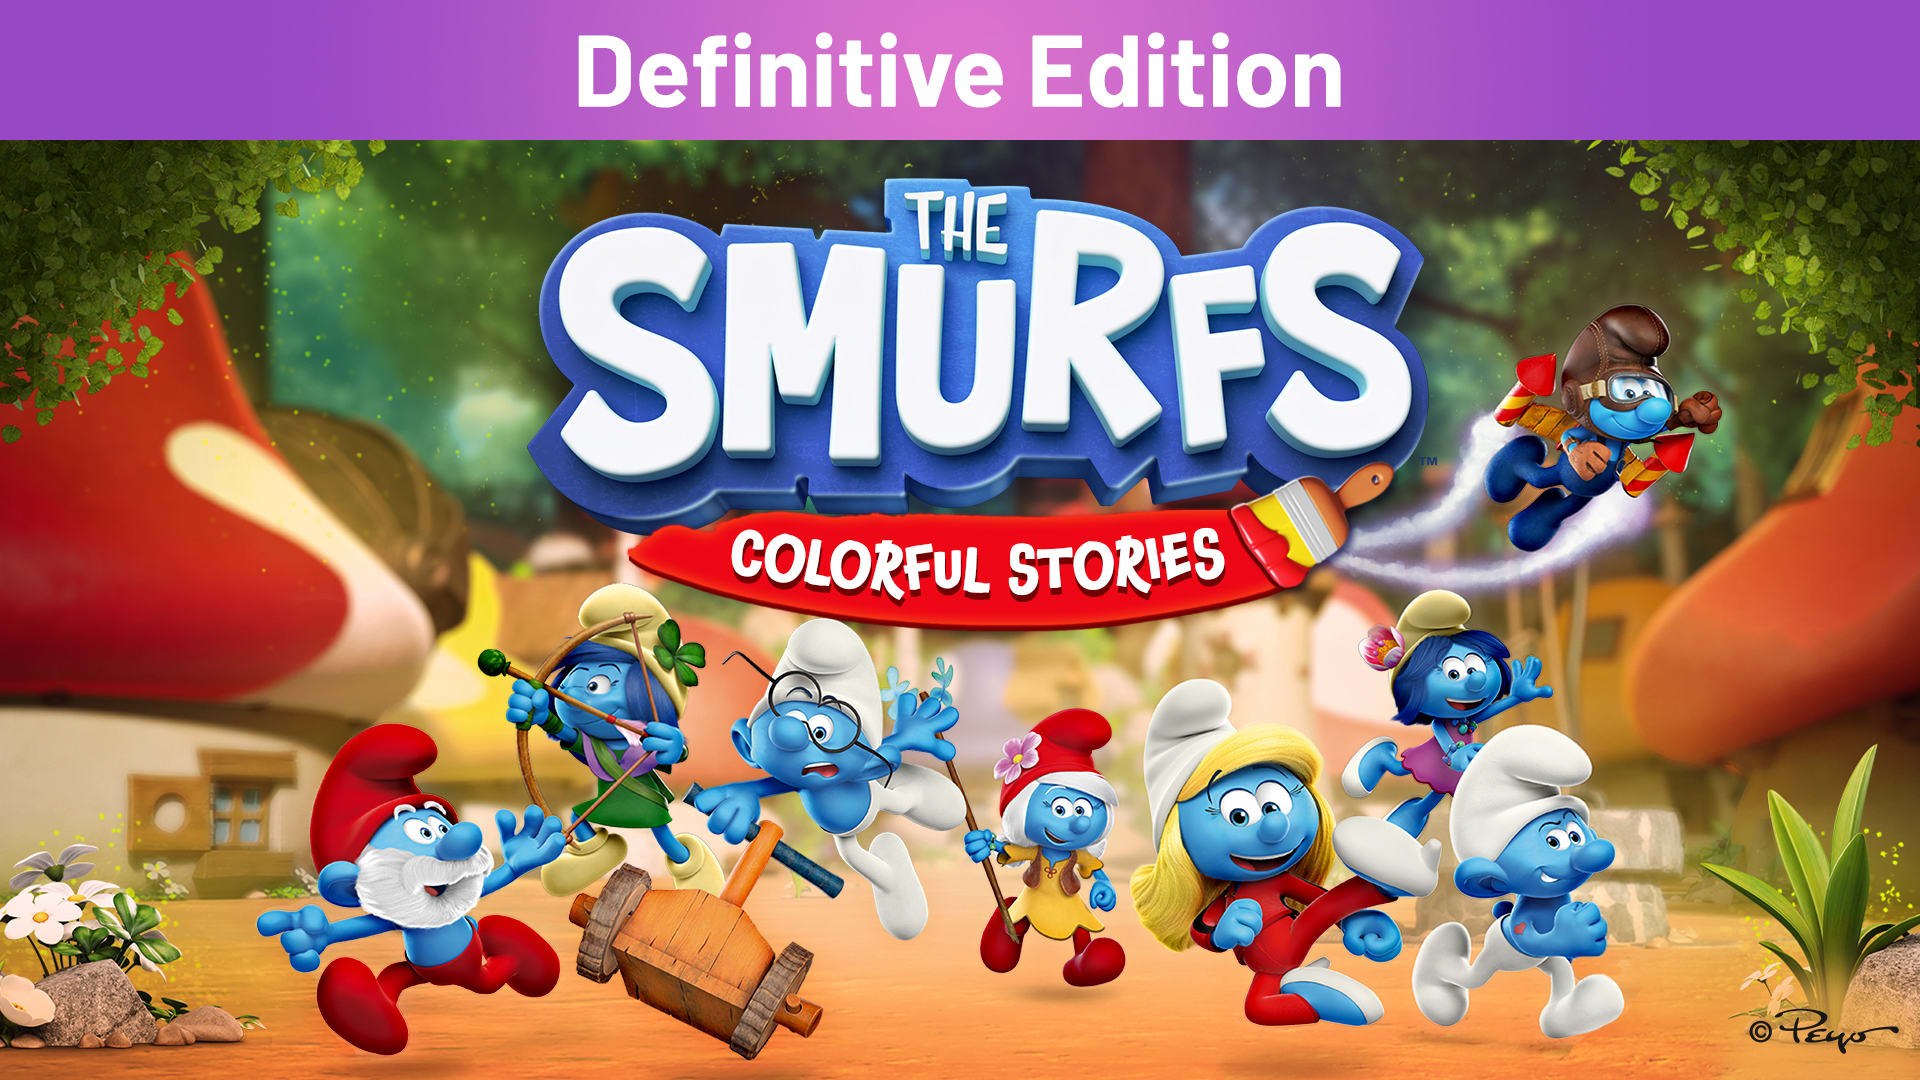 The Smurfs: Colorful Stories Definitive Edition 1